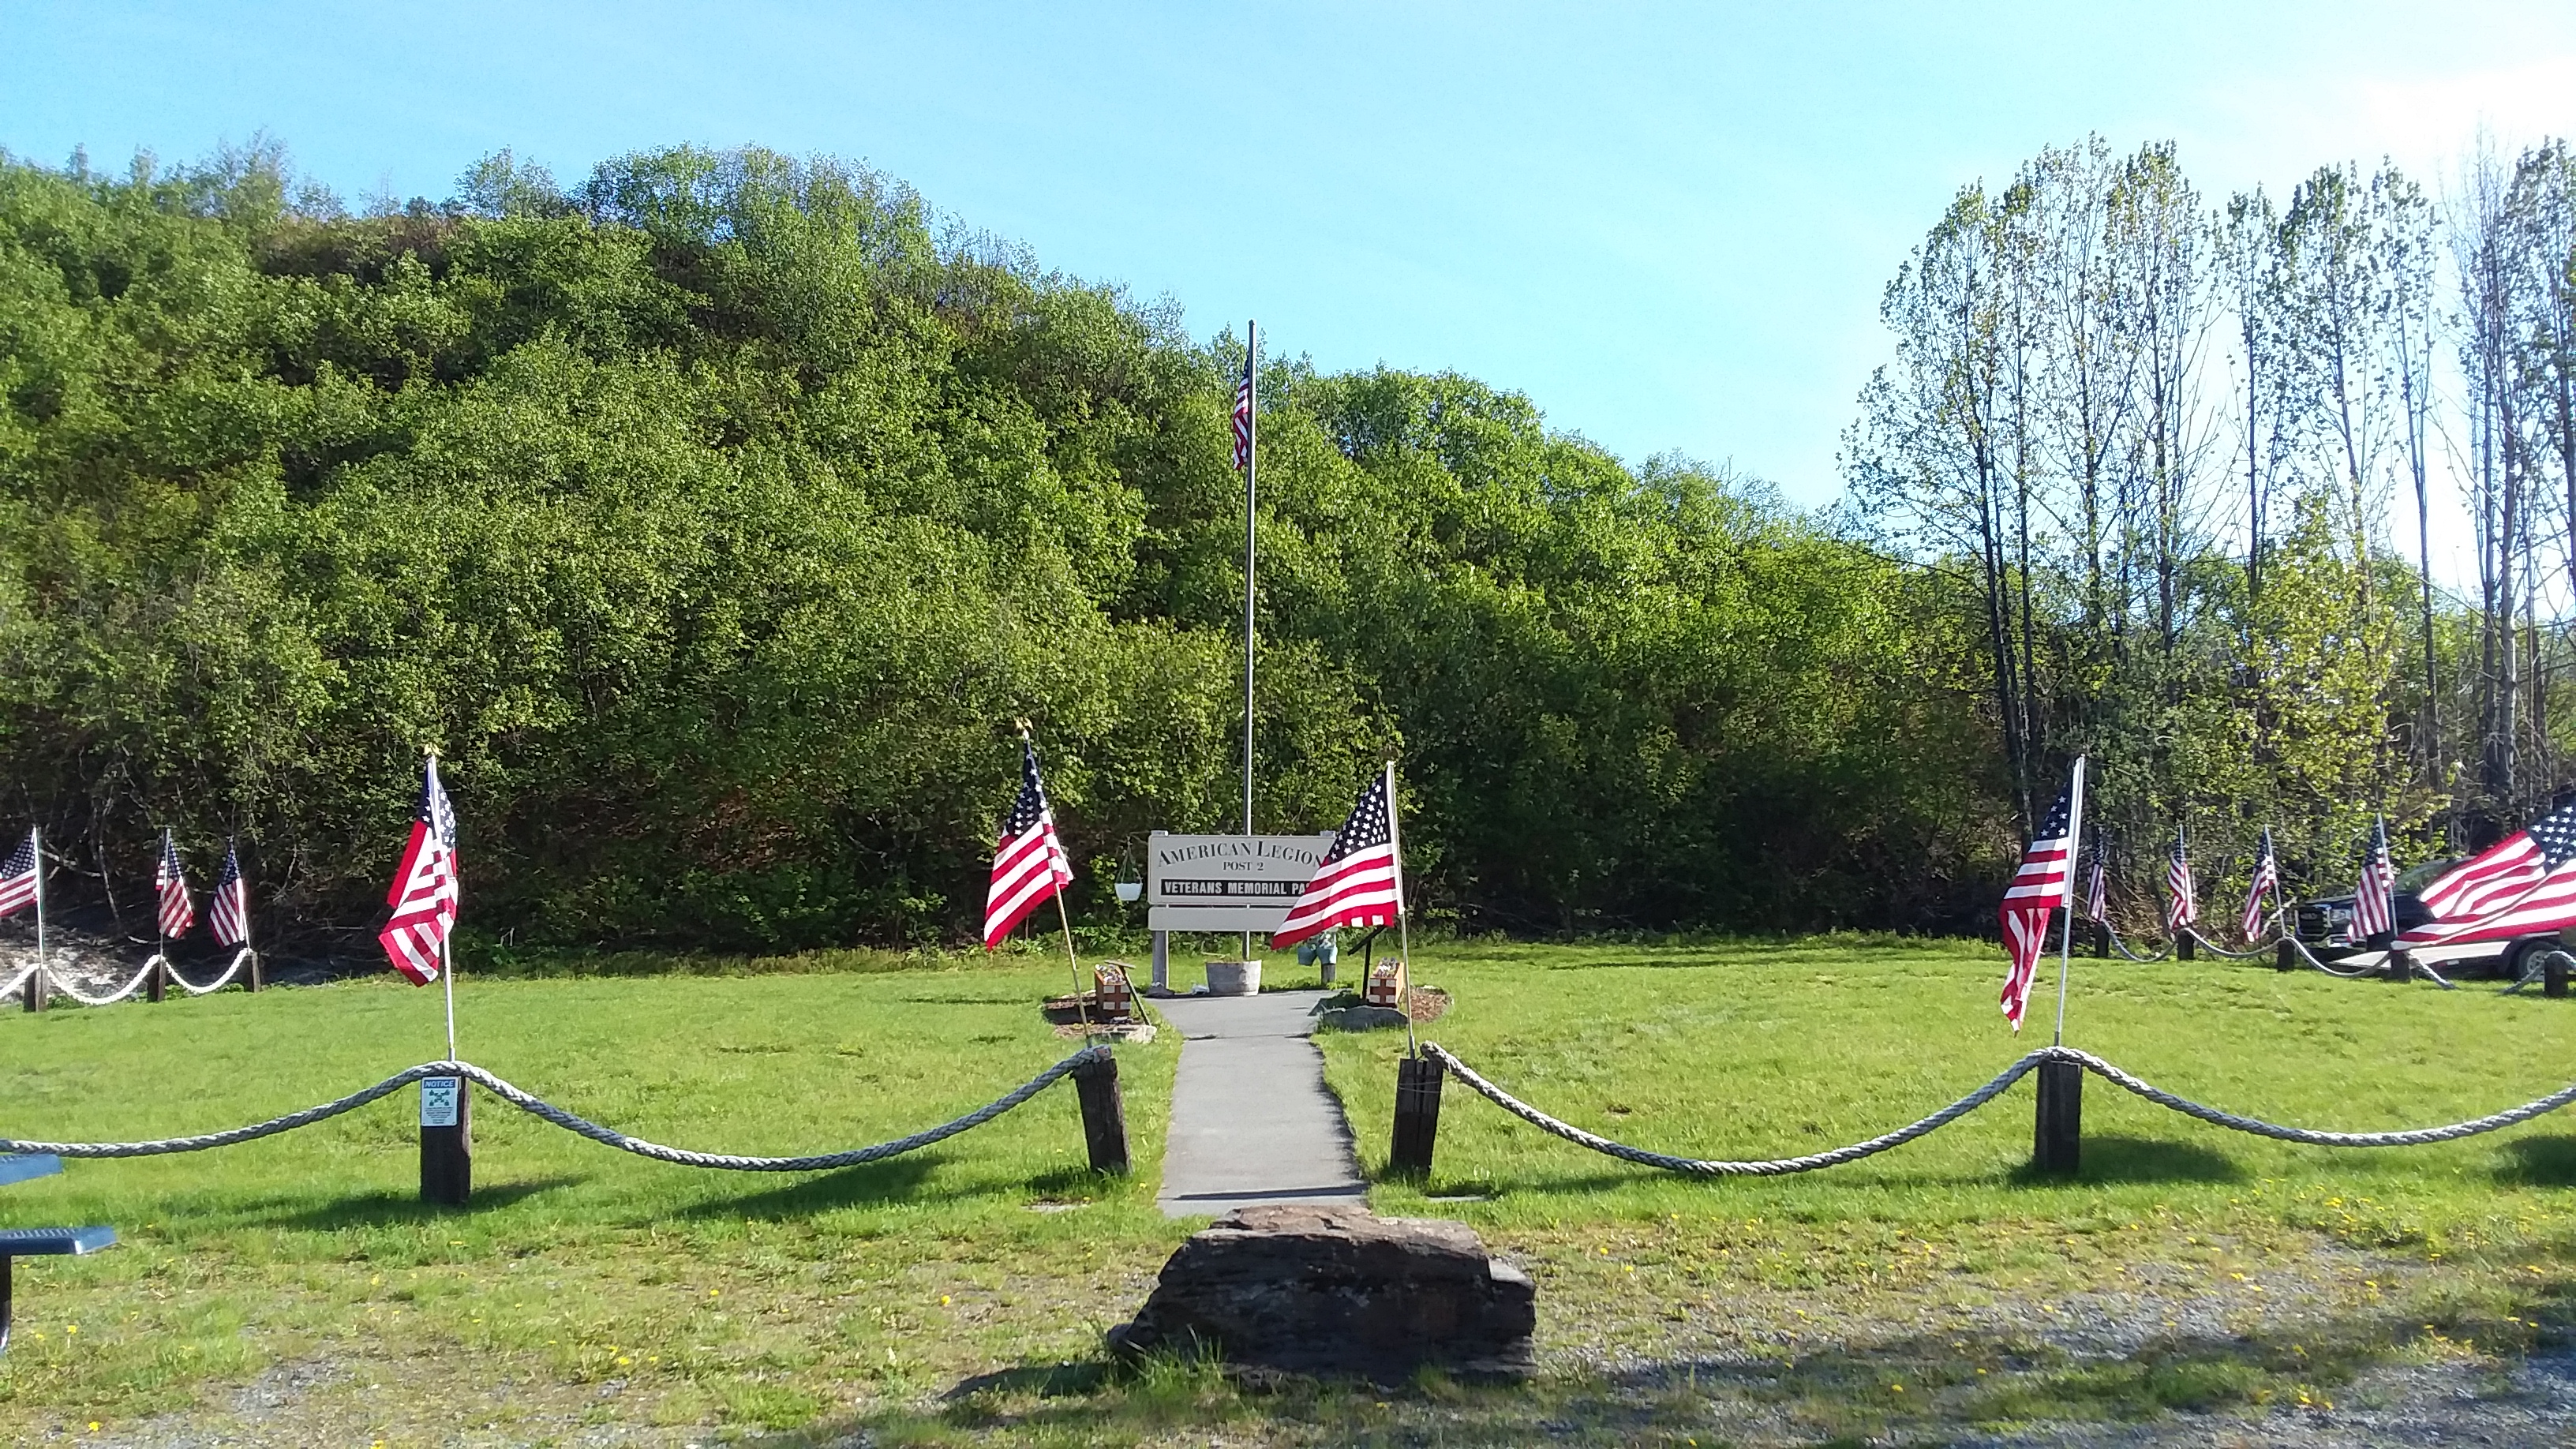 A memorial park with American flags